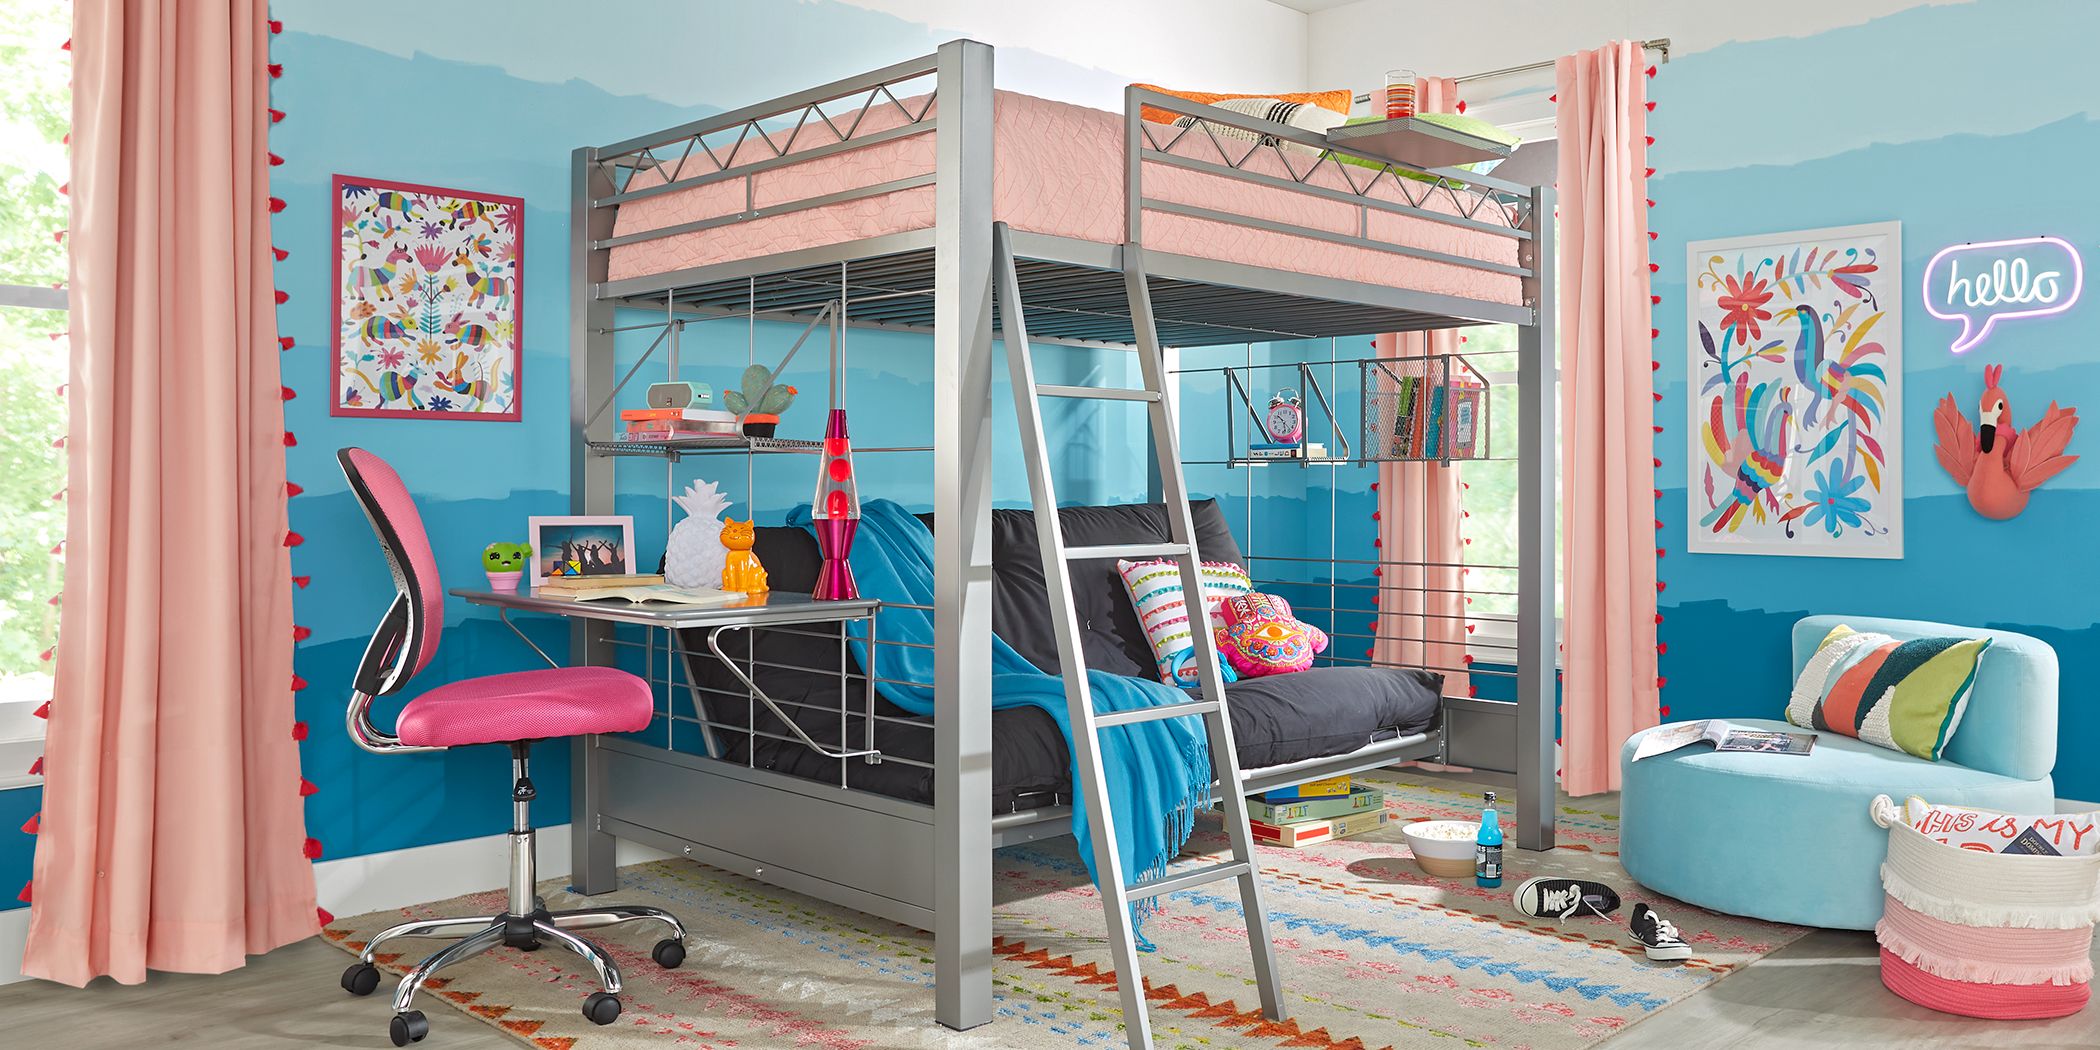 Kids Bunk Beds With Futons Underneath, Bunk Bed With Room Underneath